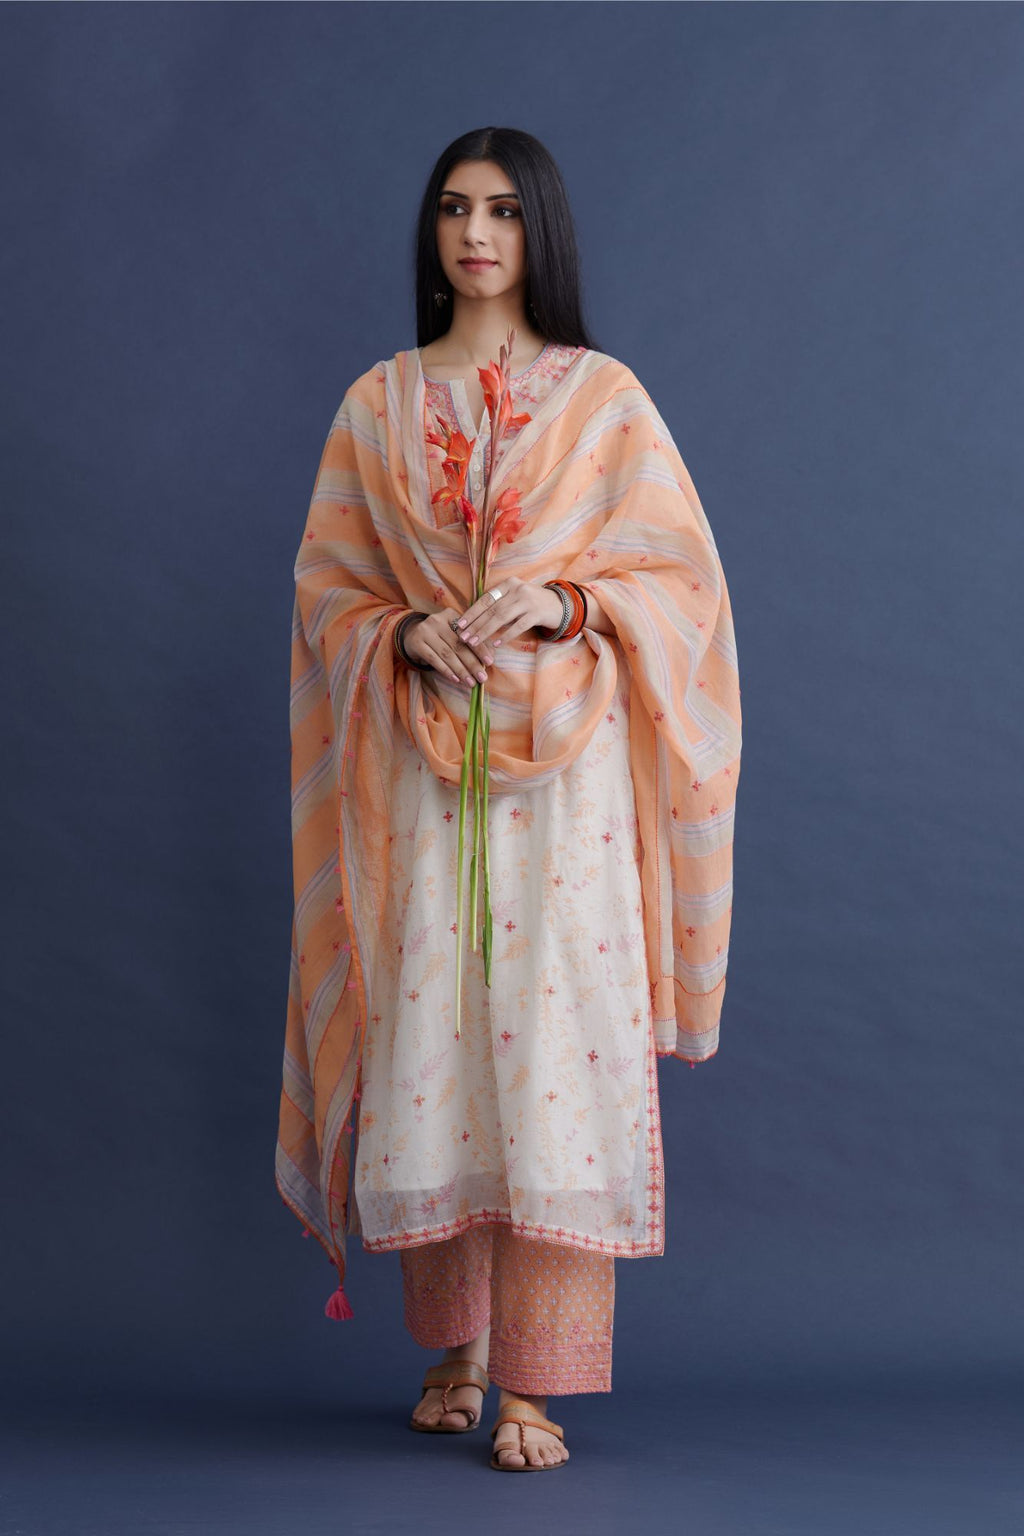 Off white hand block printed straight kurta set with all-over pink and orange thread embroidery and delicate beaded hand work